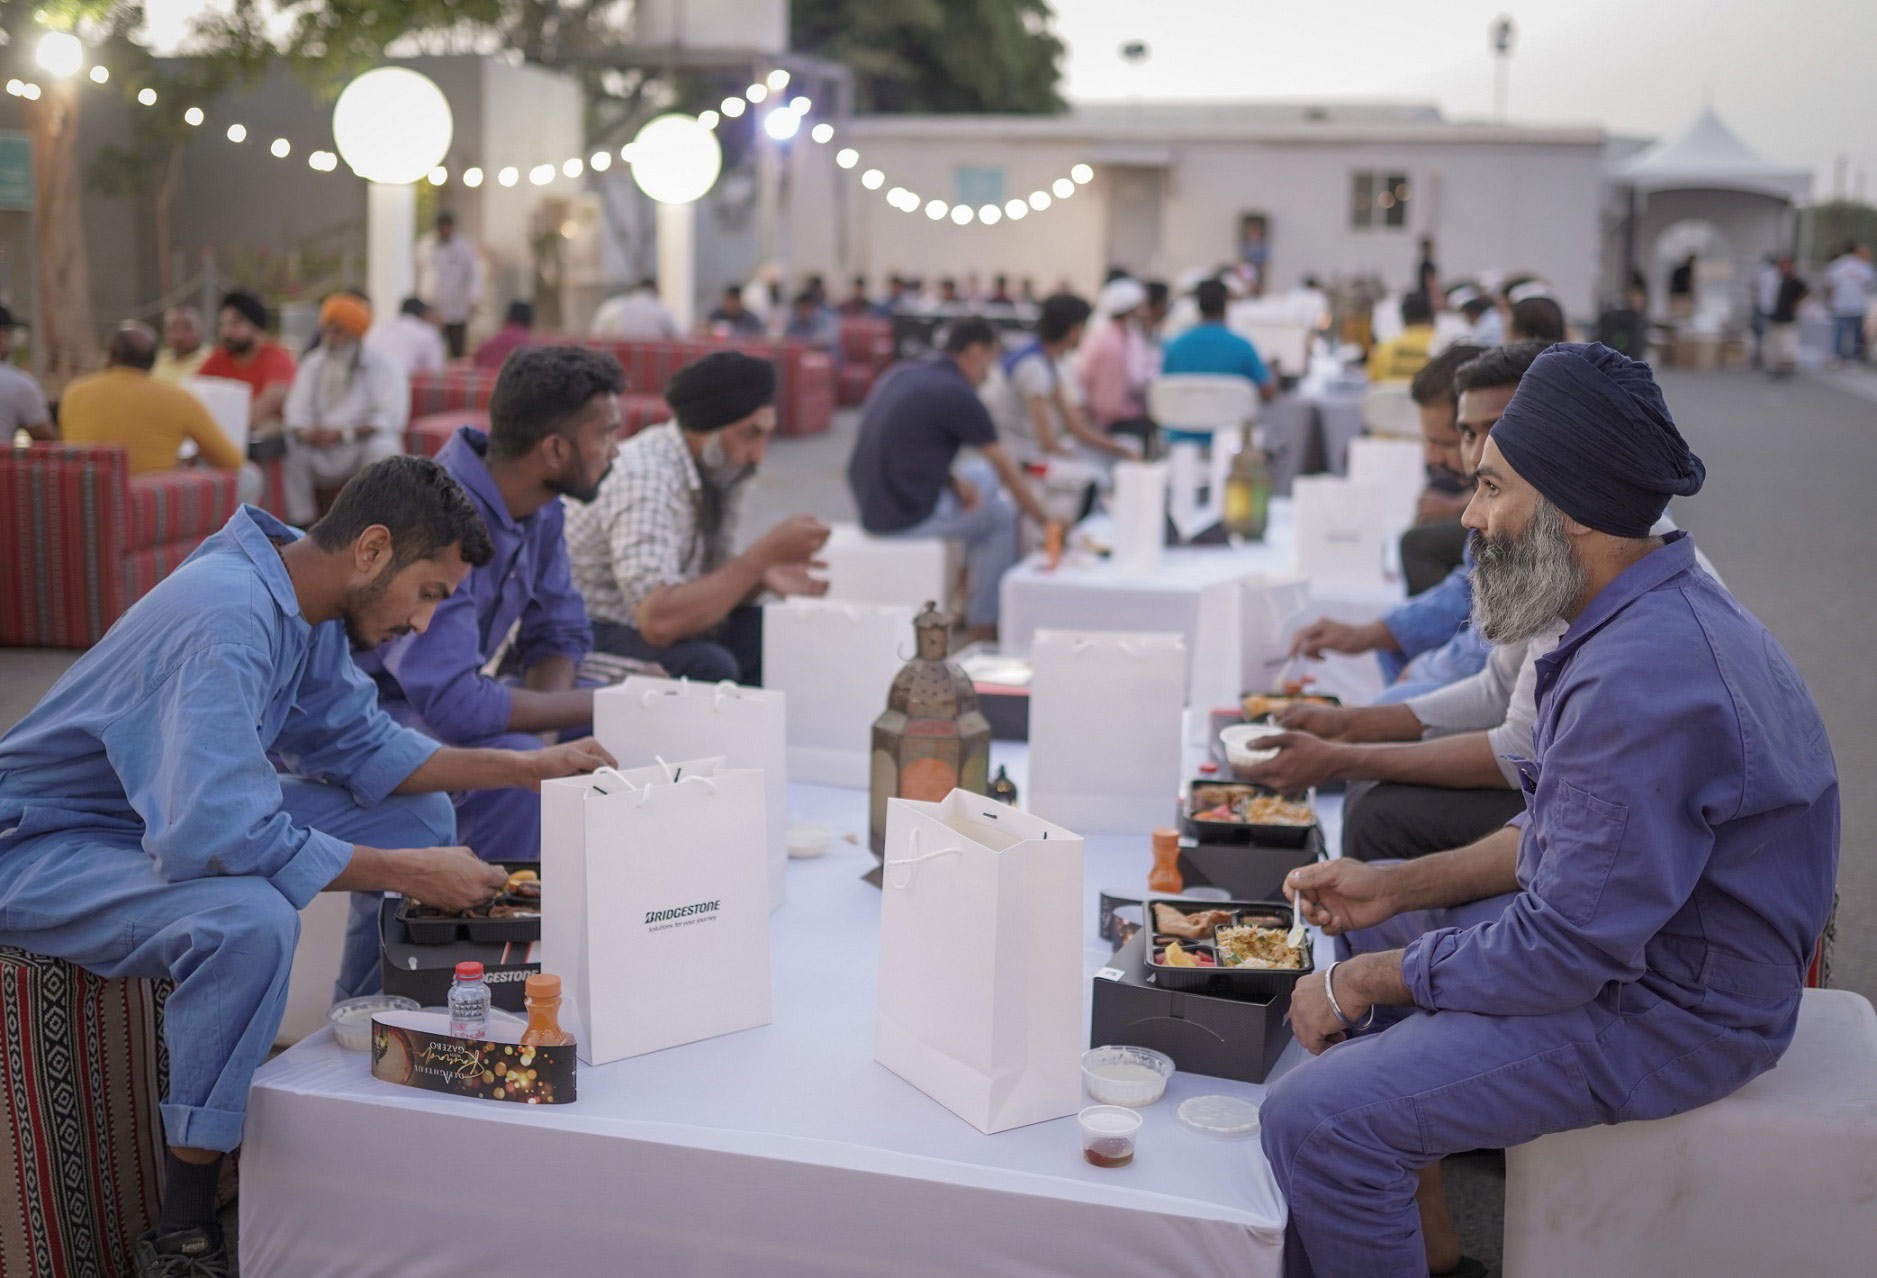 Bridgestone furthers commitment to society with new ‘Eyes on the Road’ Ramadan campaign